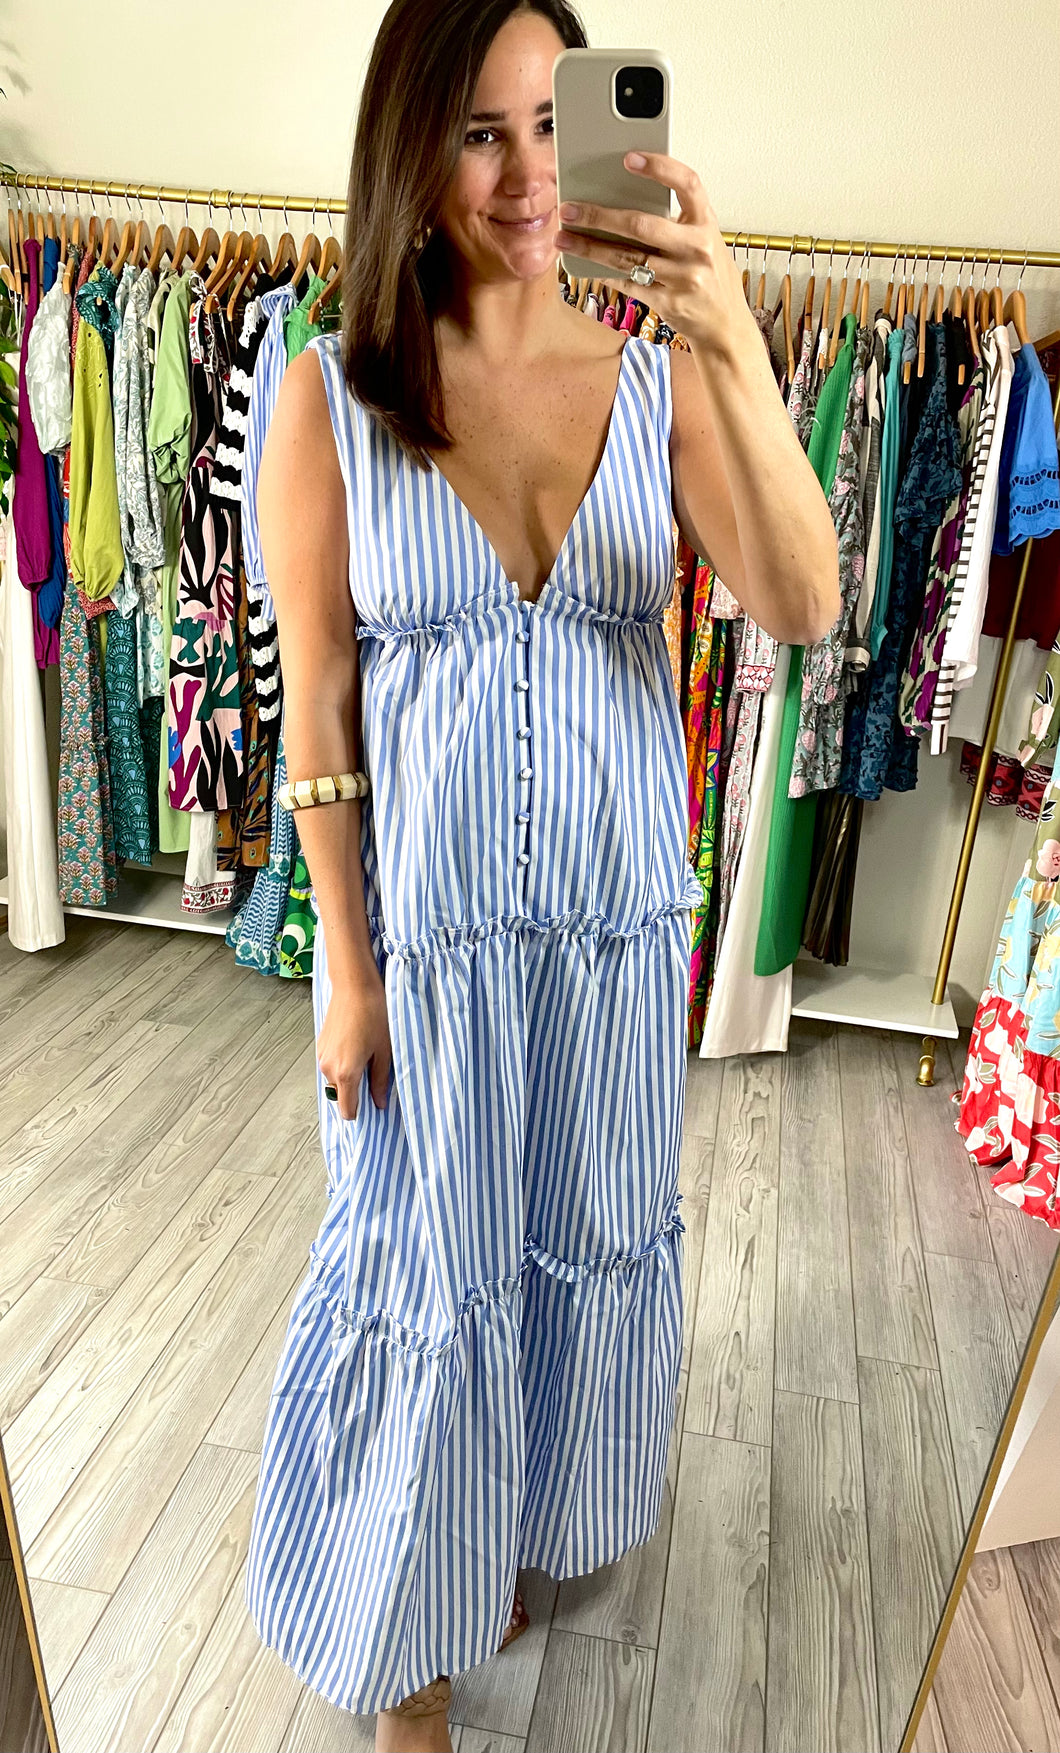 Blue and white thin striped maxi dress. Button front and tiered ruffle detailing throughout skirt. Fashion tape NOT needed. Back mirrors frontside. Poly silk blend.   True to size, wearing size small.  Good for bump, post bump or no bump!  Could be worn as a coverup